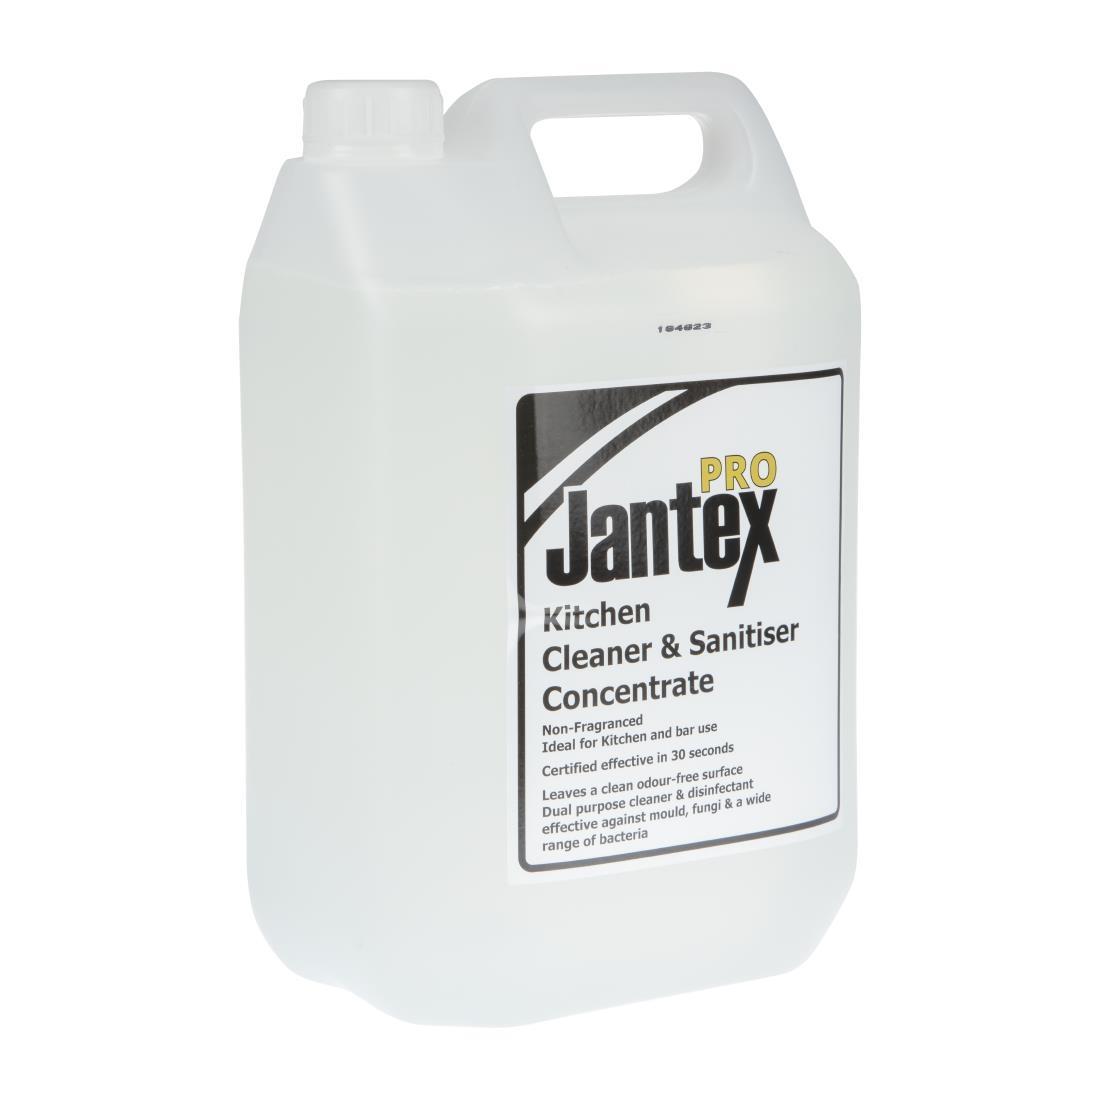 Jantex Pro Kitchen Cleaner and Sanitiser Concentrate 5Ltr - GM986  - 2